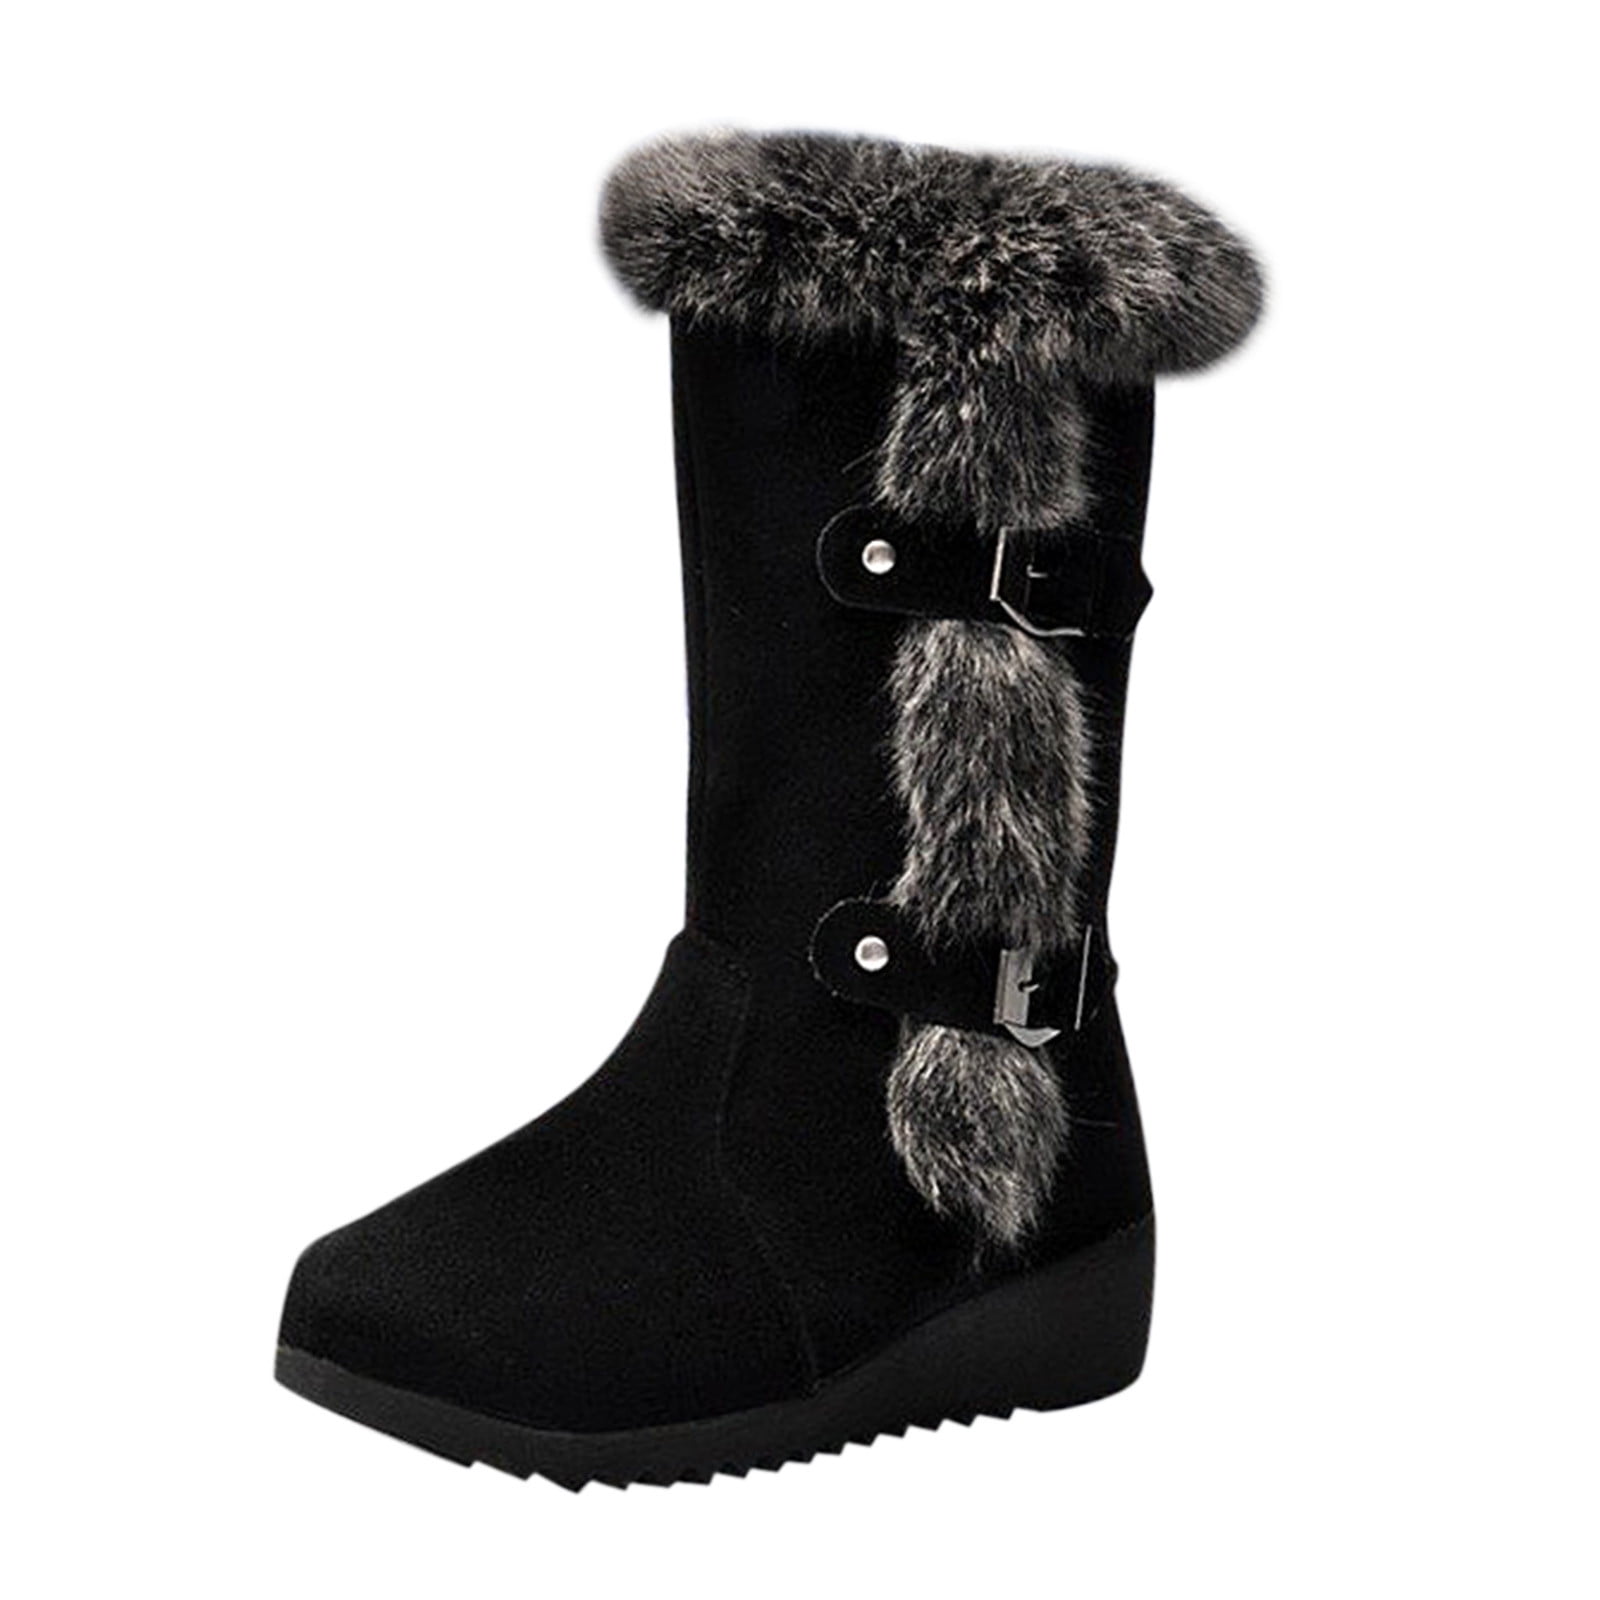 Wide Calf Shearling Boots Sale | www.medialit.org